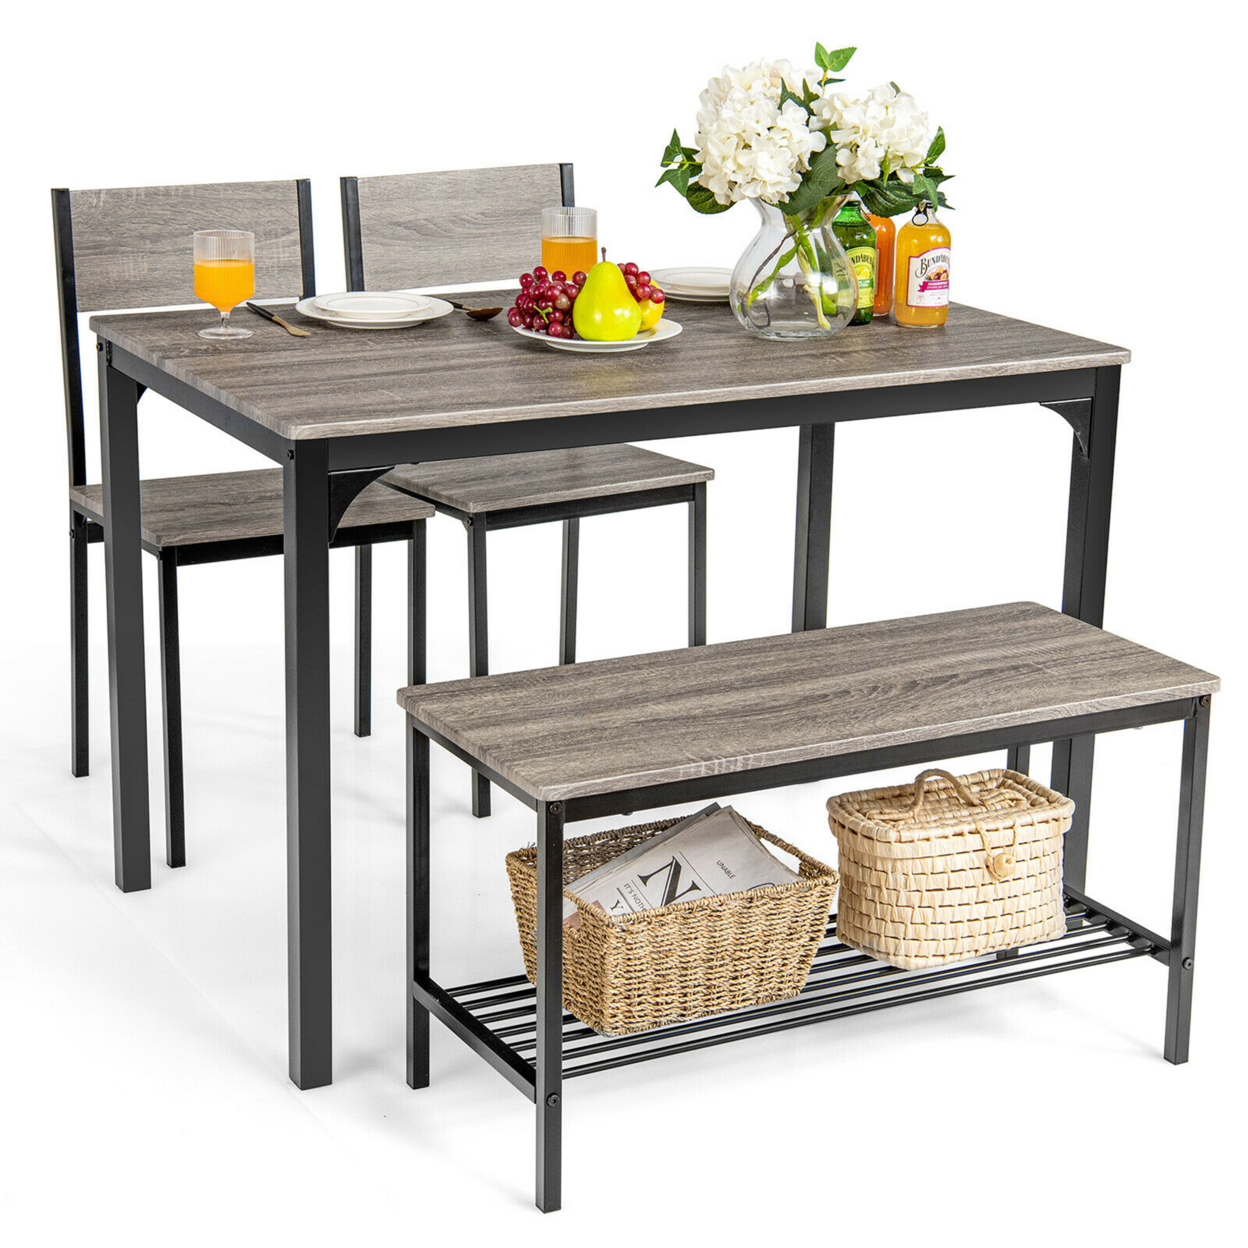 4pcs Dining Table Set Rustic Desk 2 Chairs & Bench W/ Storage Rack - Grey